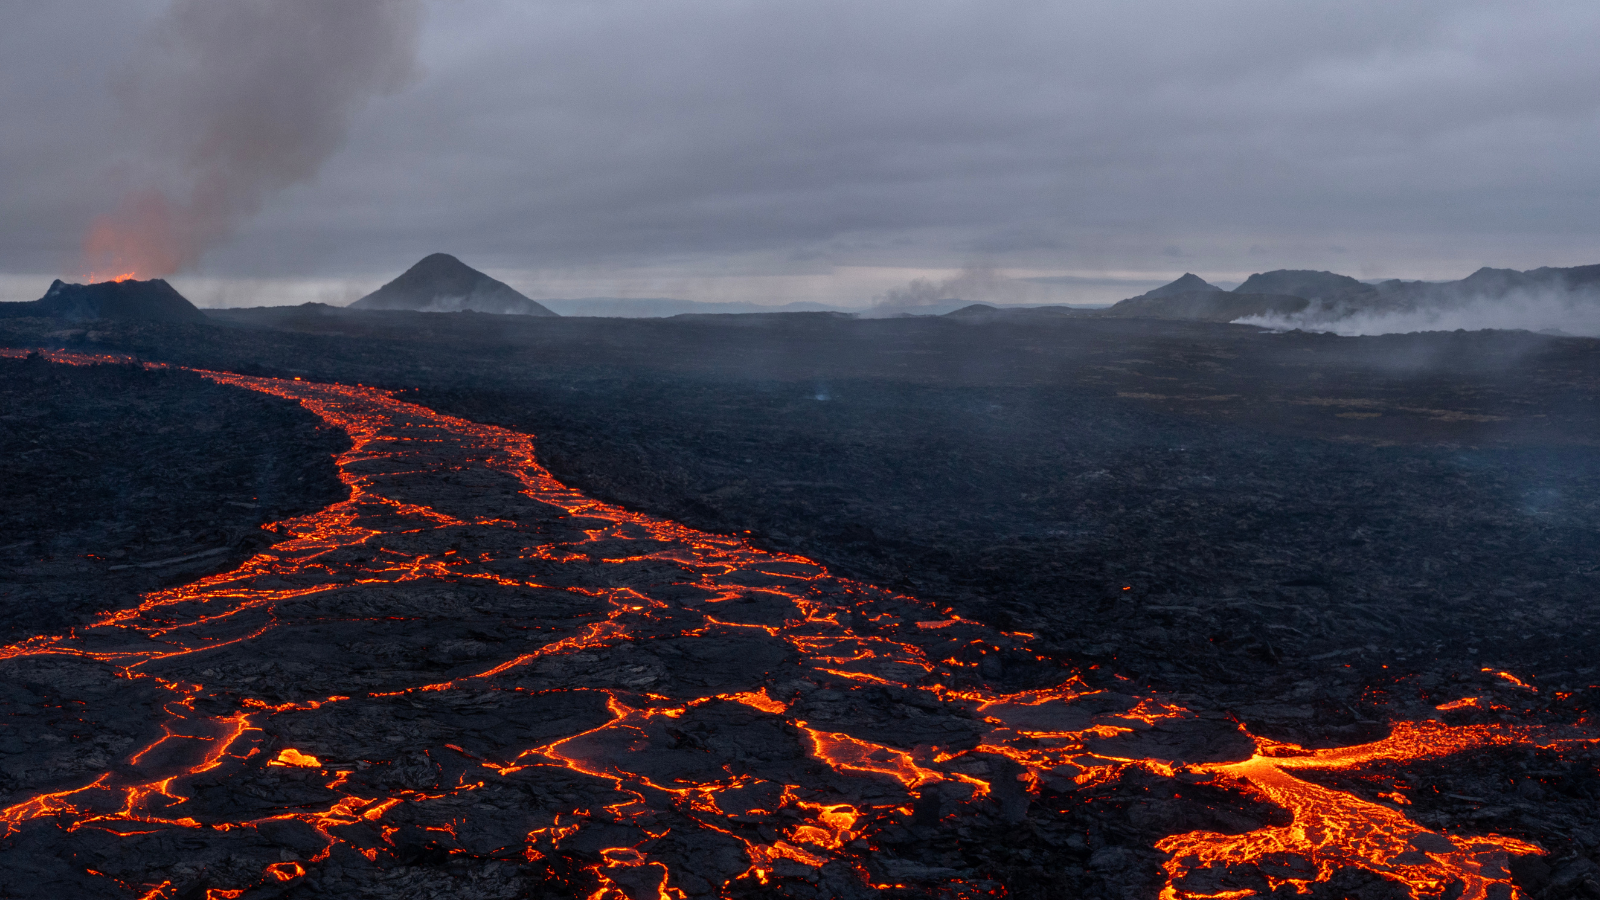 Orange highlights across a flow of lava with the Litli-Hrútur eruption on the horizon.